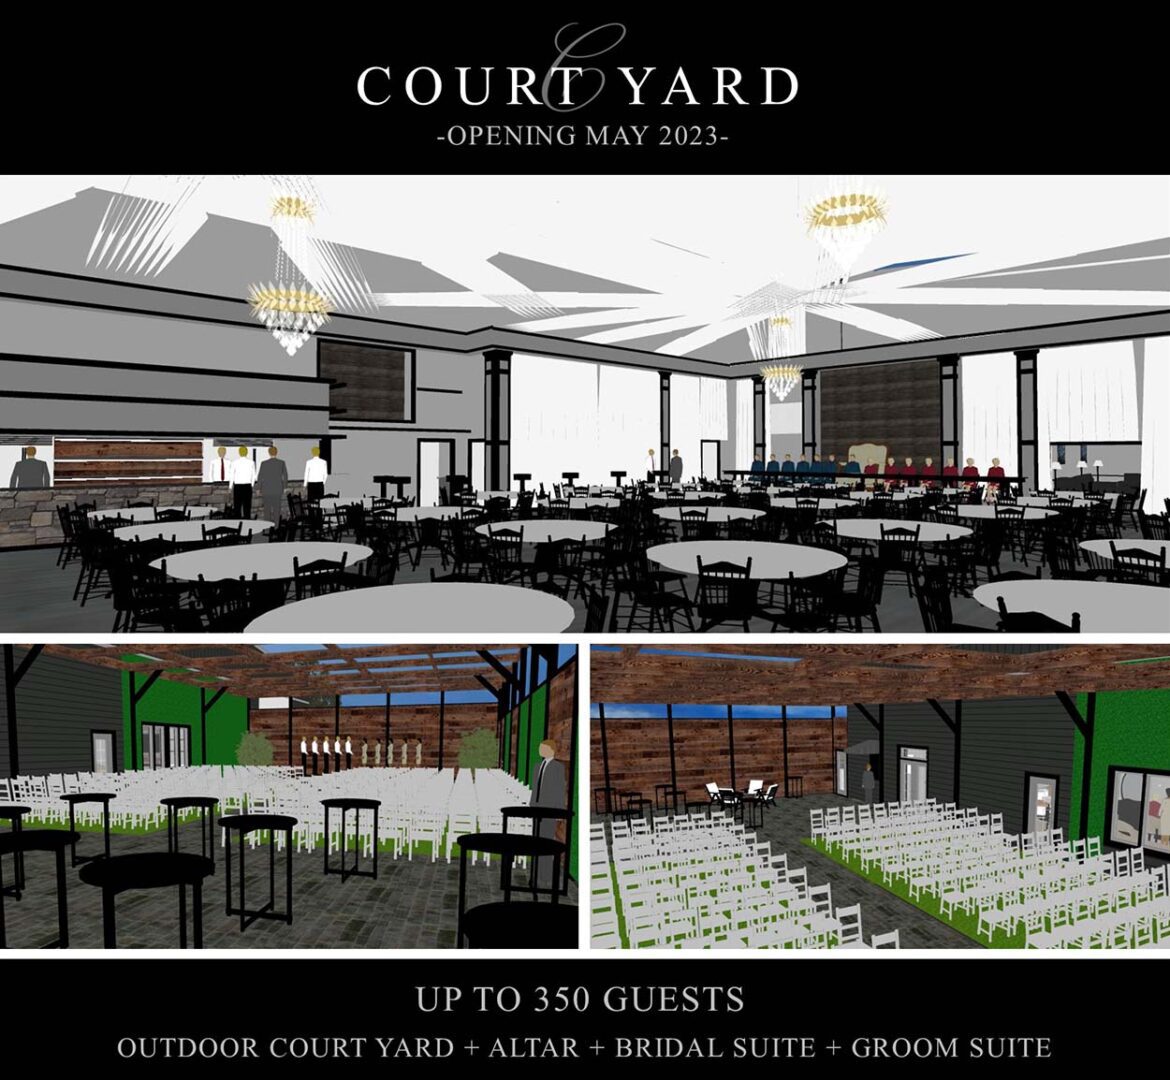 New Court Yard Wedding Venue at Celebrations on the River La Crosse, WI Opening May 2023